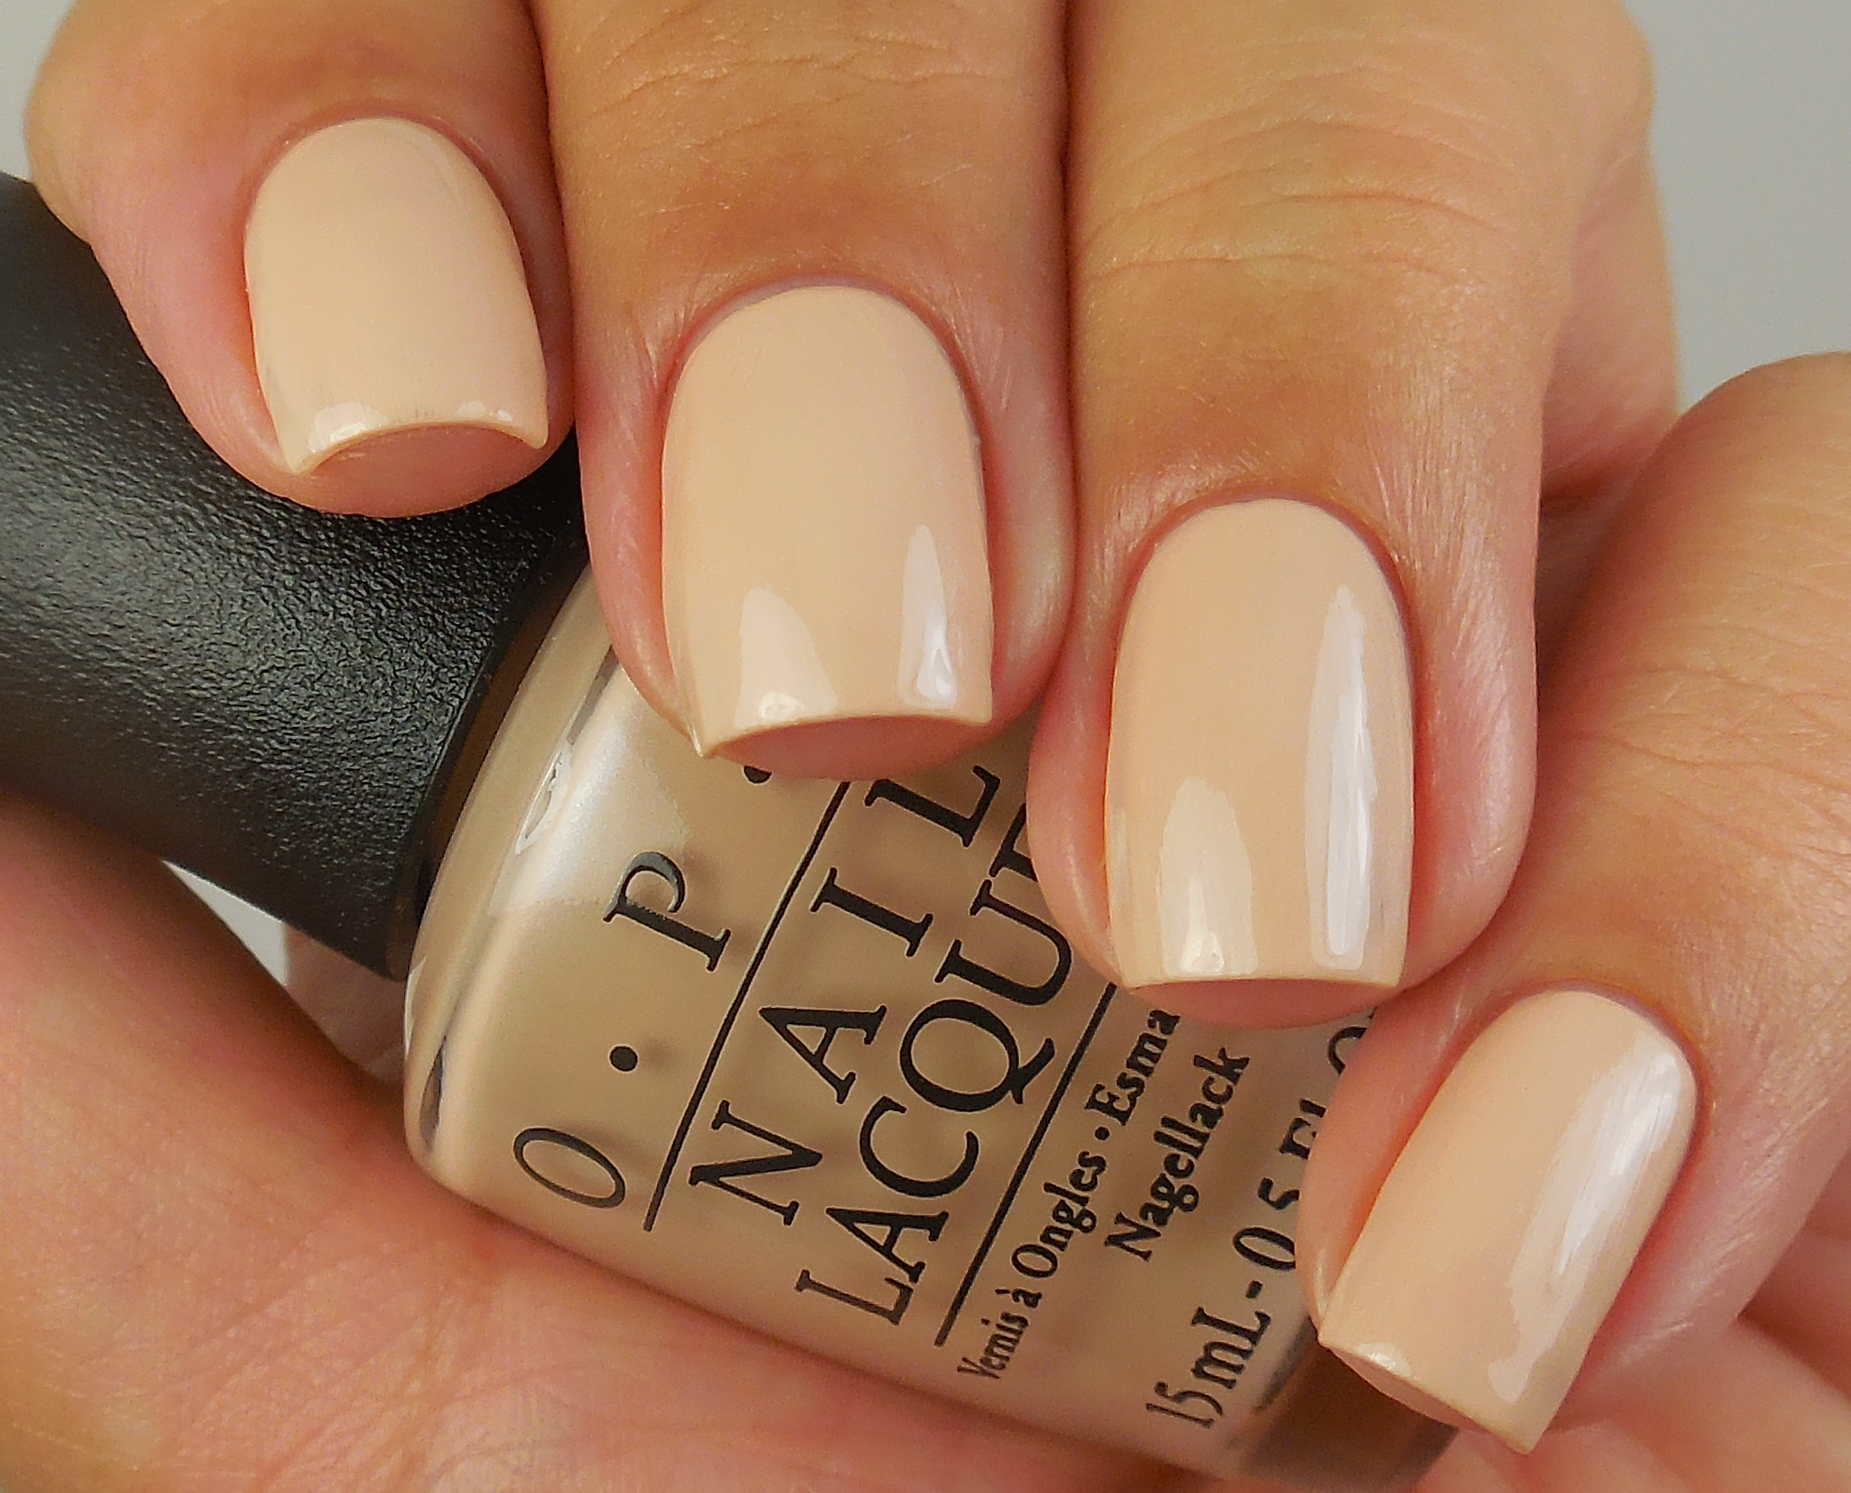 OPI Nail Lacquer in "Pale to the Chief" - wide 6